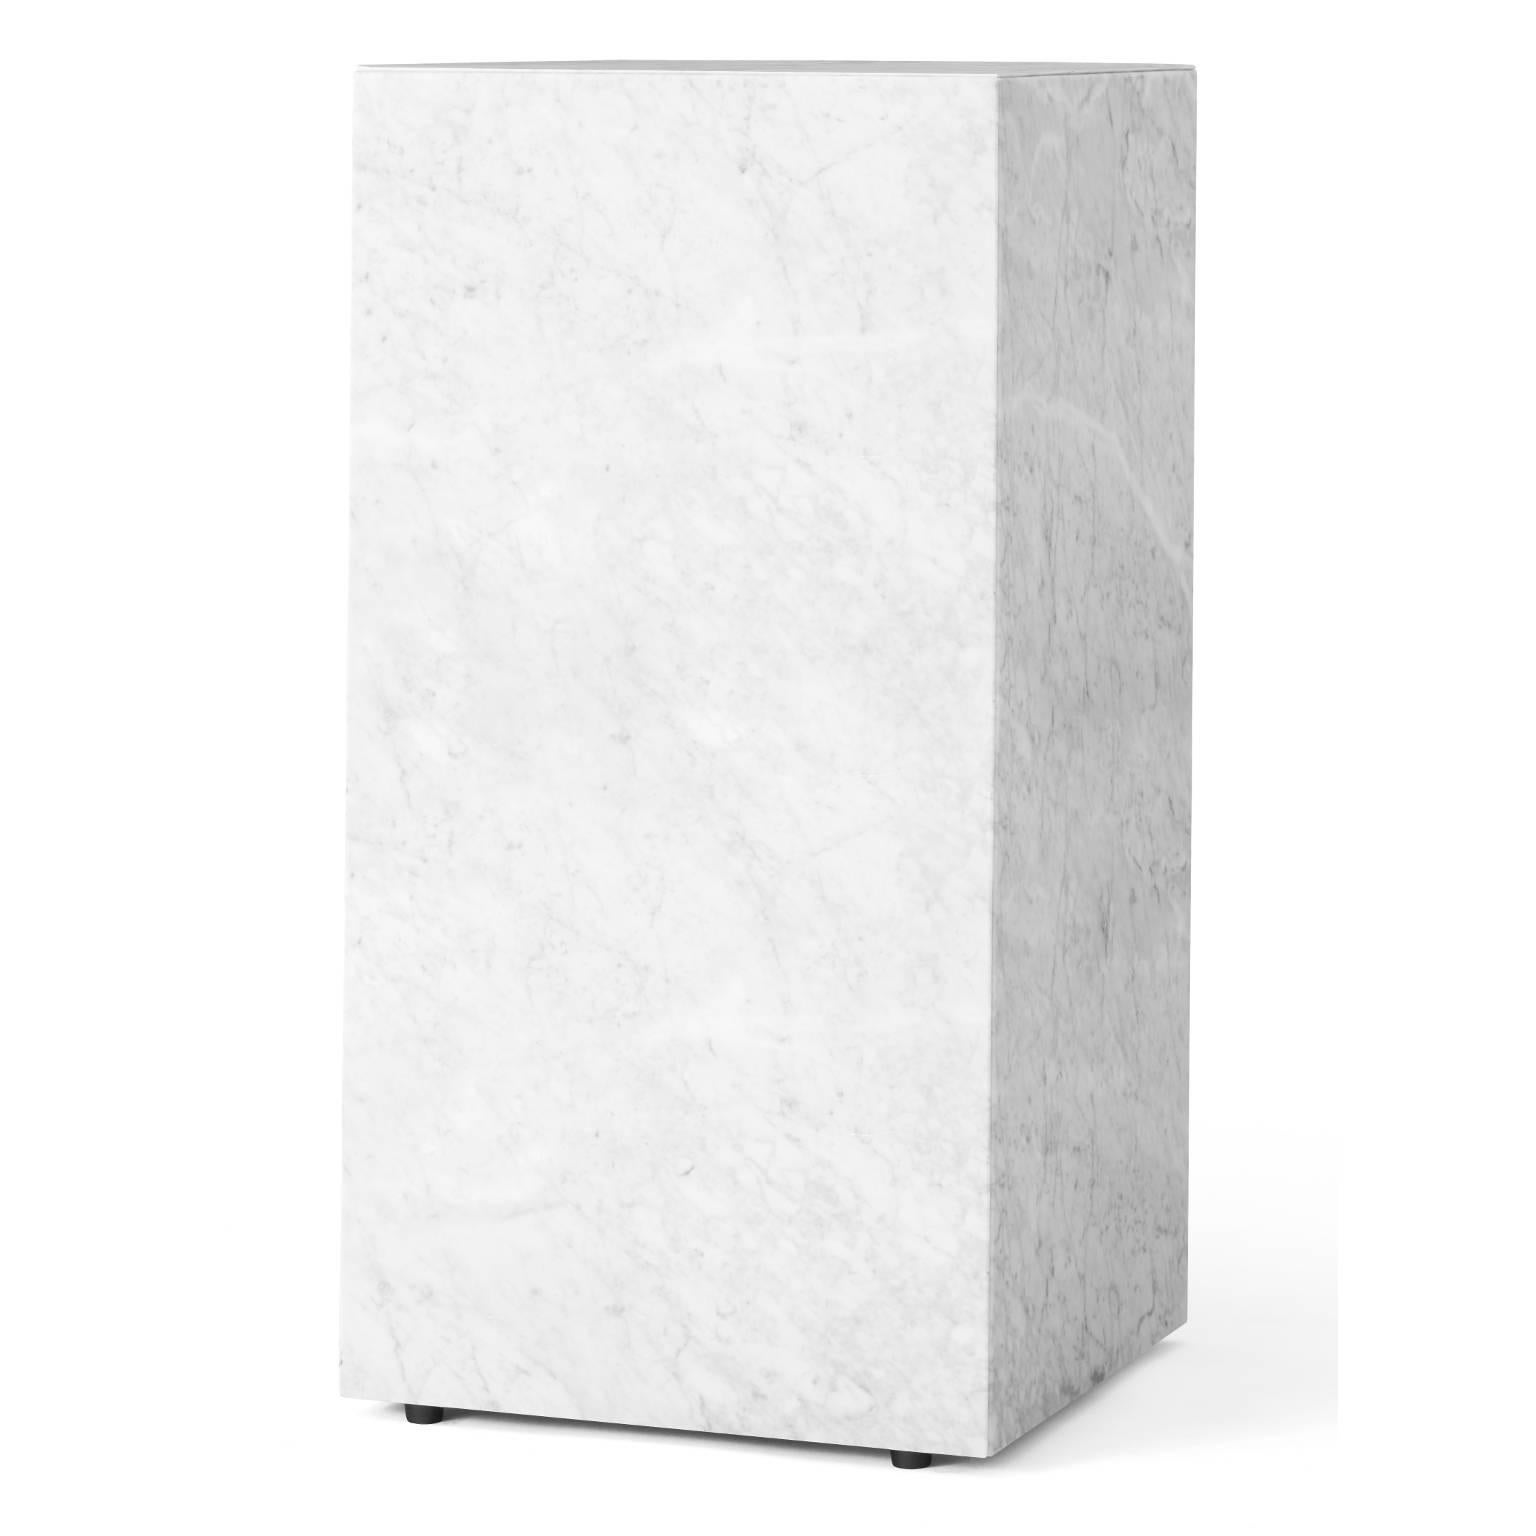 Over centuries, the plinth has been a much mused-over object. With this project Danish studio Norm Architects set out to rethink the uses of the plinth and to reveal the natural beauty of marble. The result is a series of podiums with multiple uses